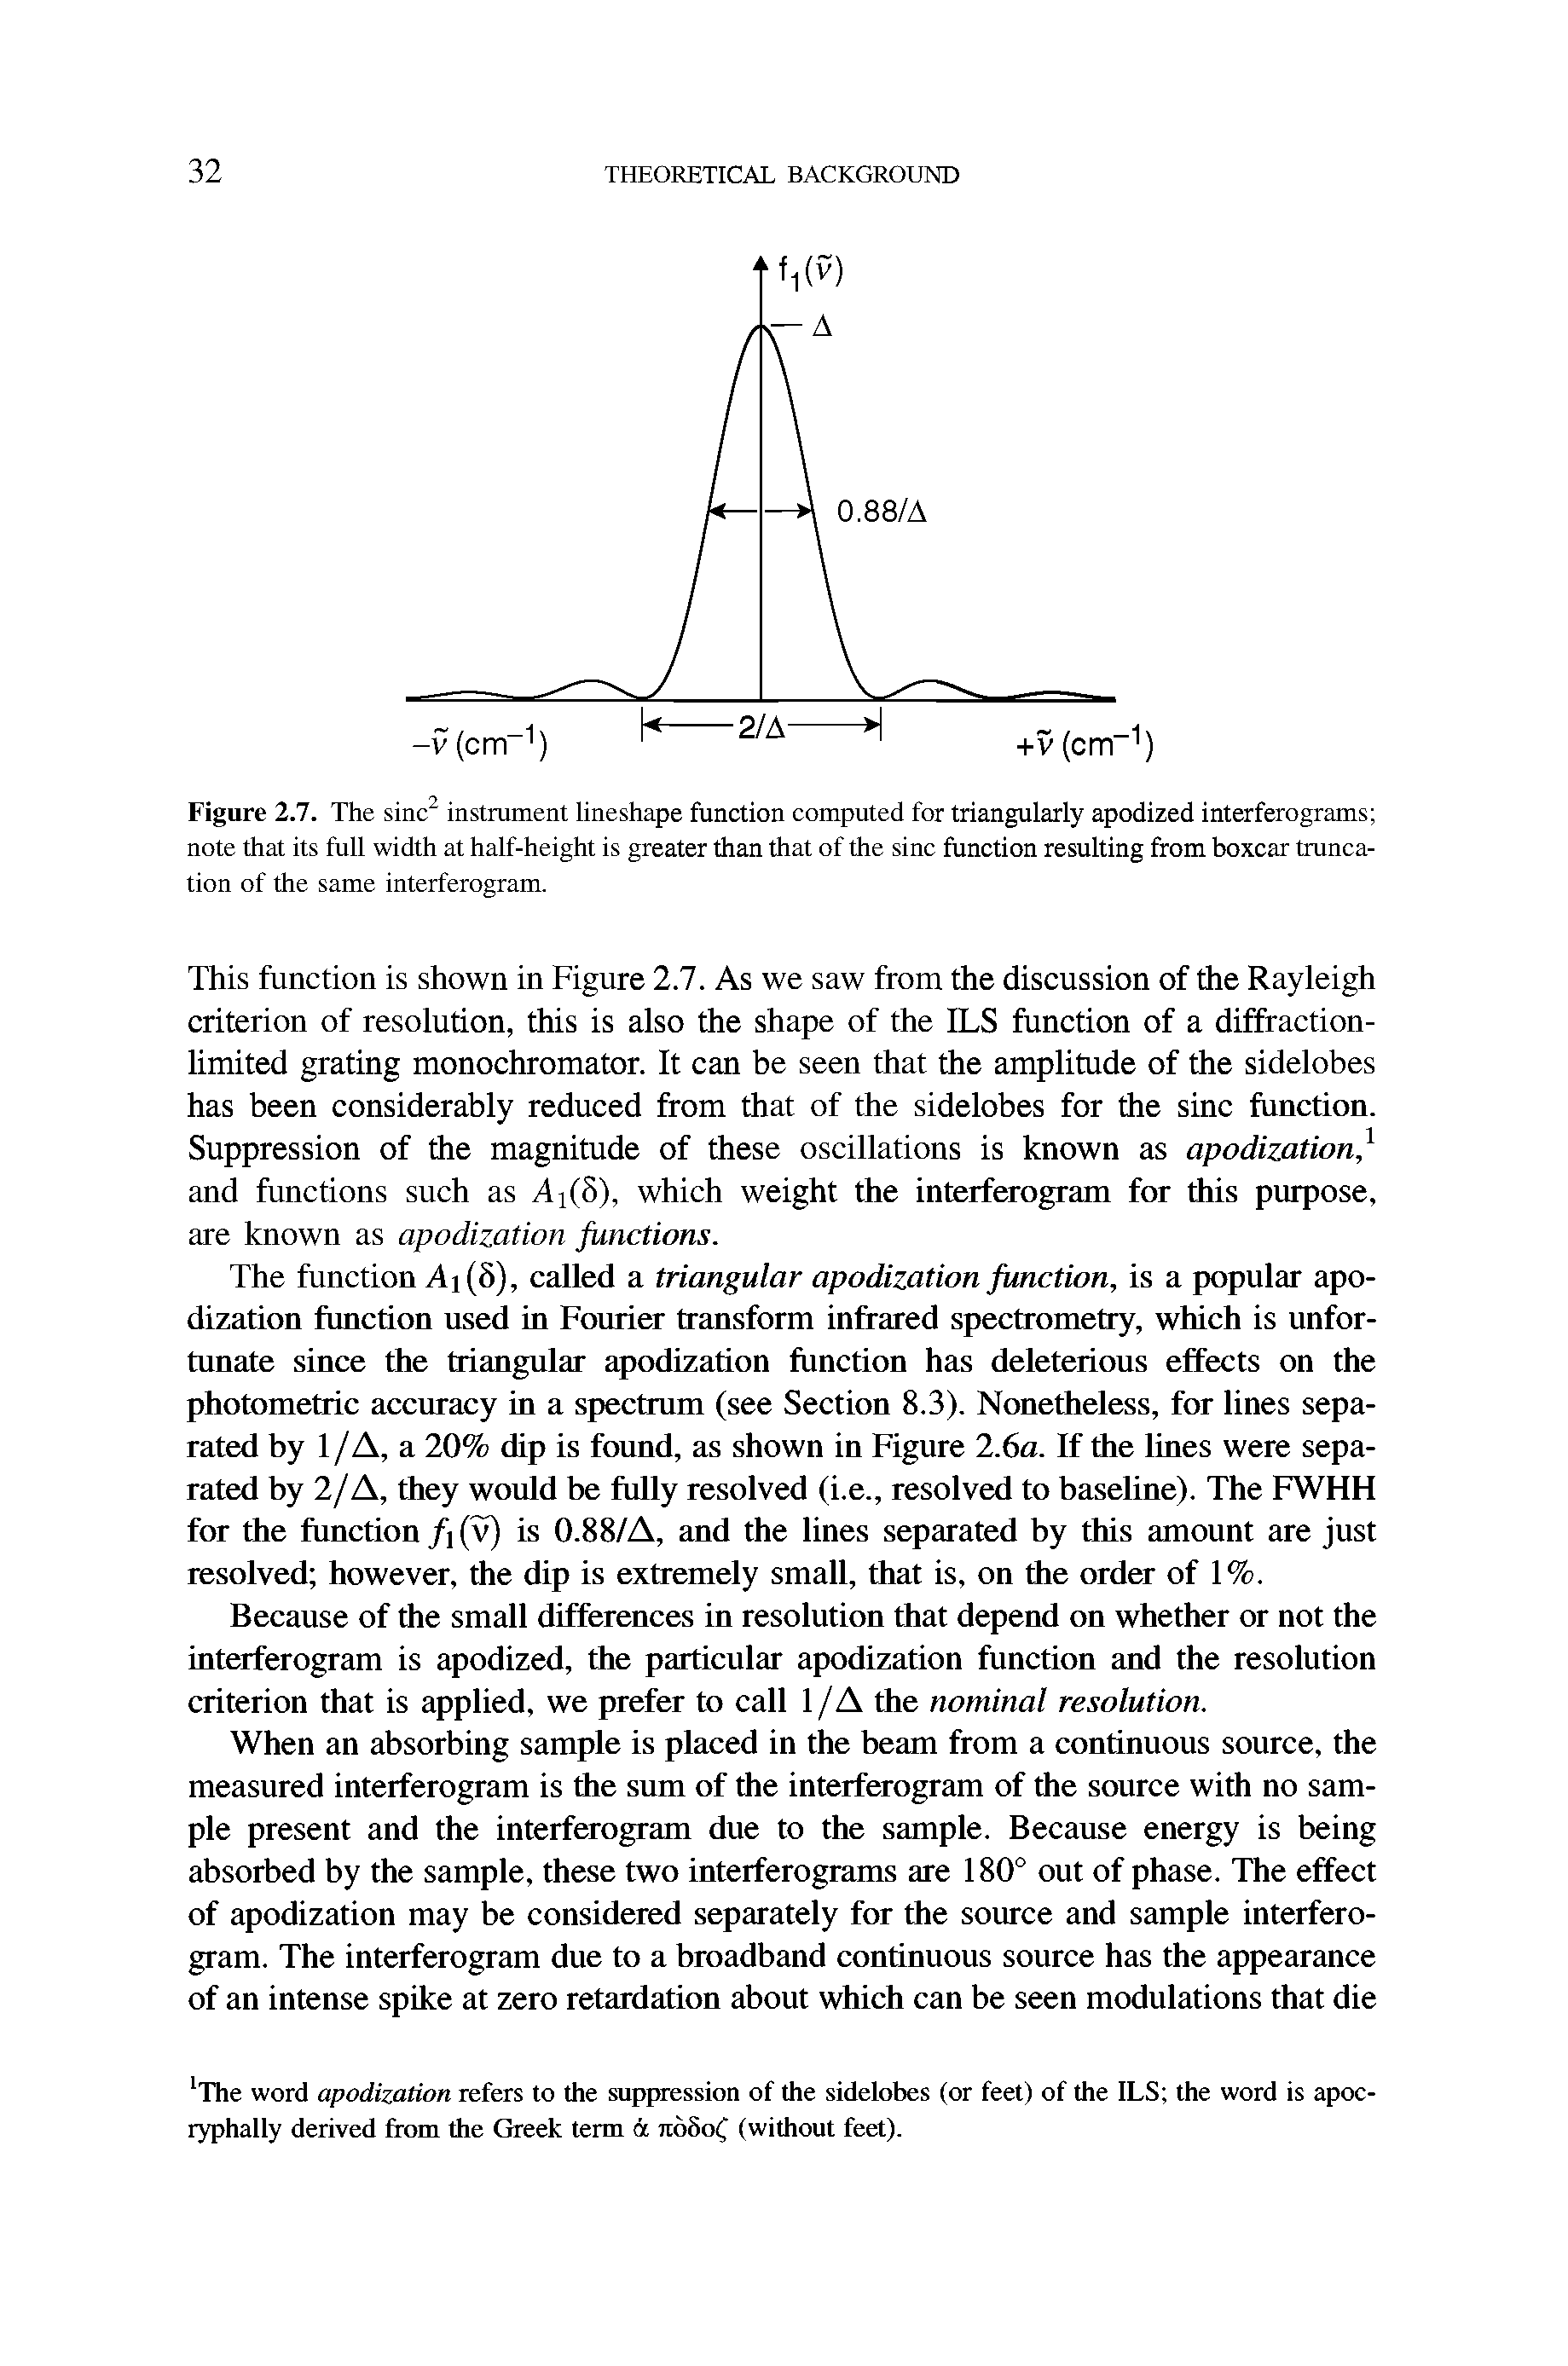 Figure 2.7. The sinc instrument lineshape function computed for triangularly apodized interferograms note that its full width at half-height is greater than that of the sine function resulting ftom boxcar truncation of the same interferogram.